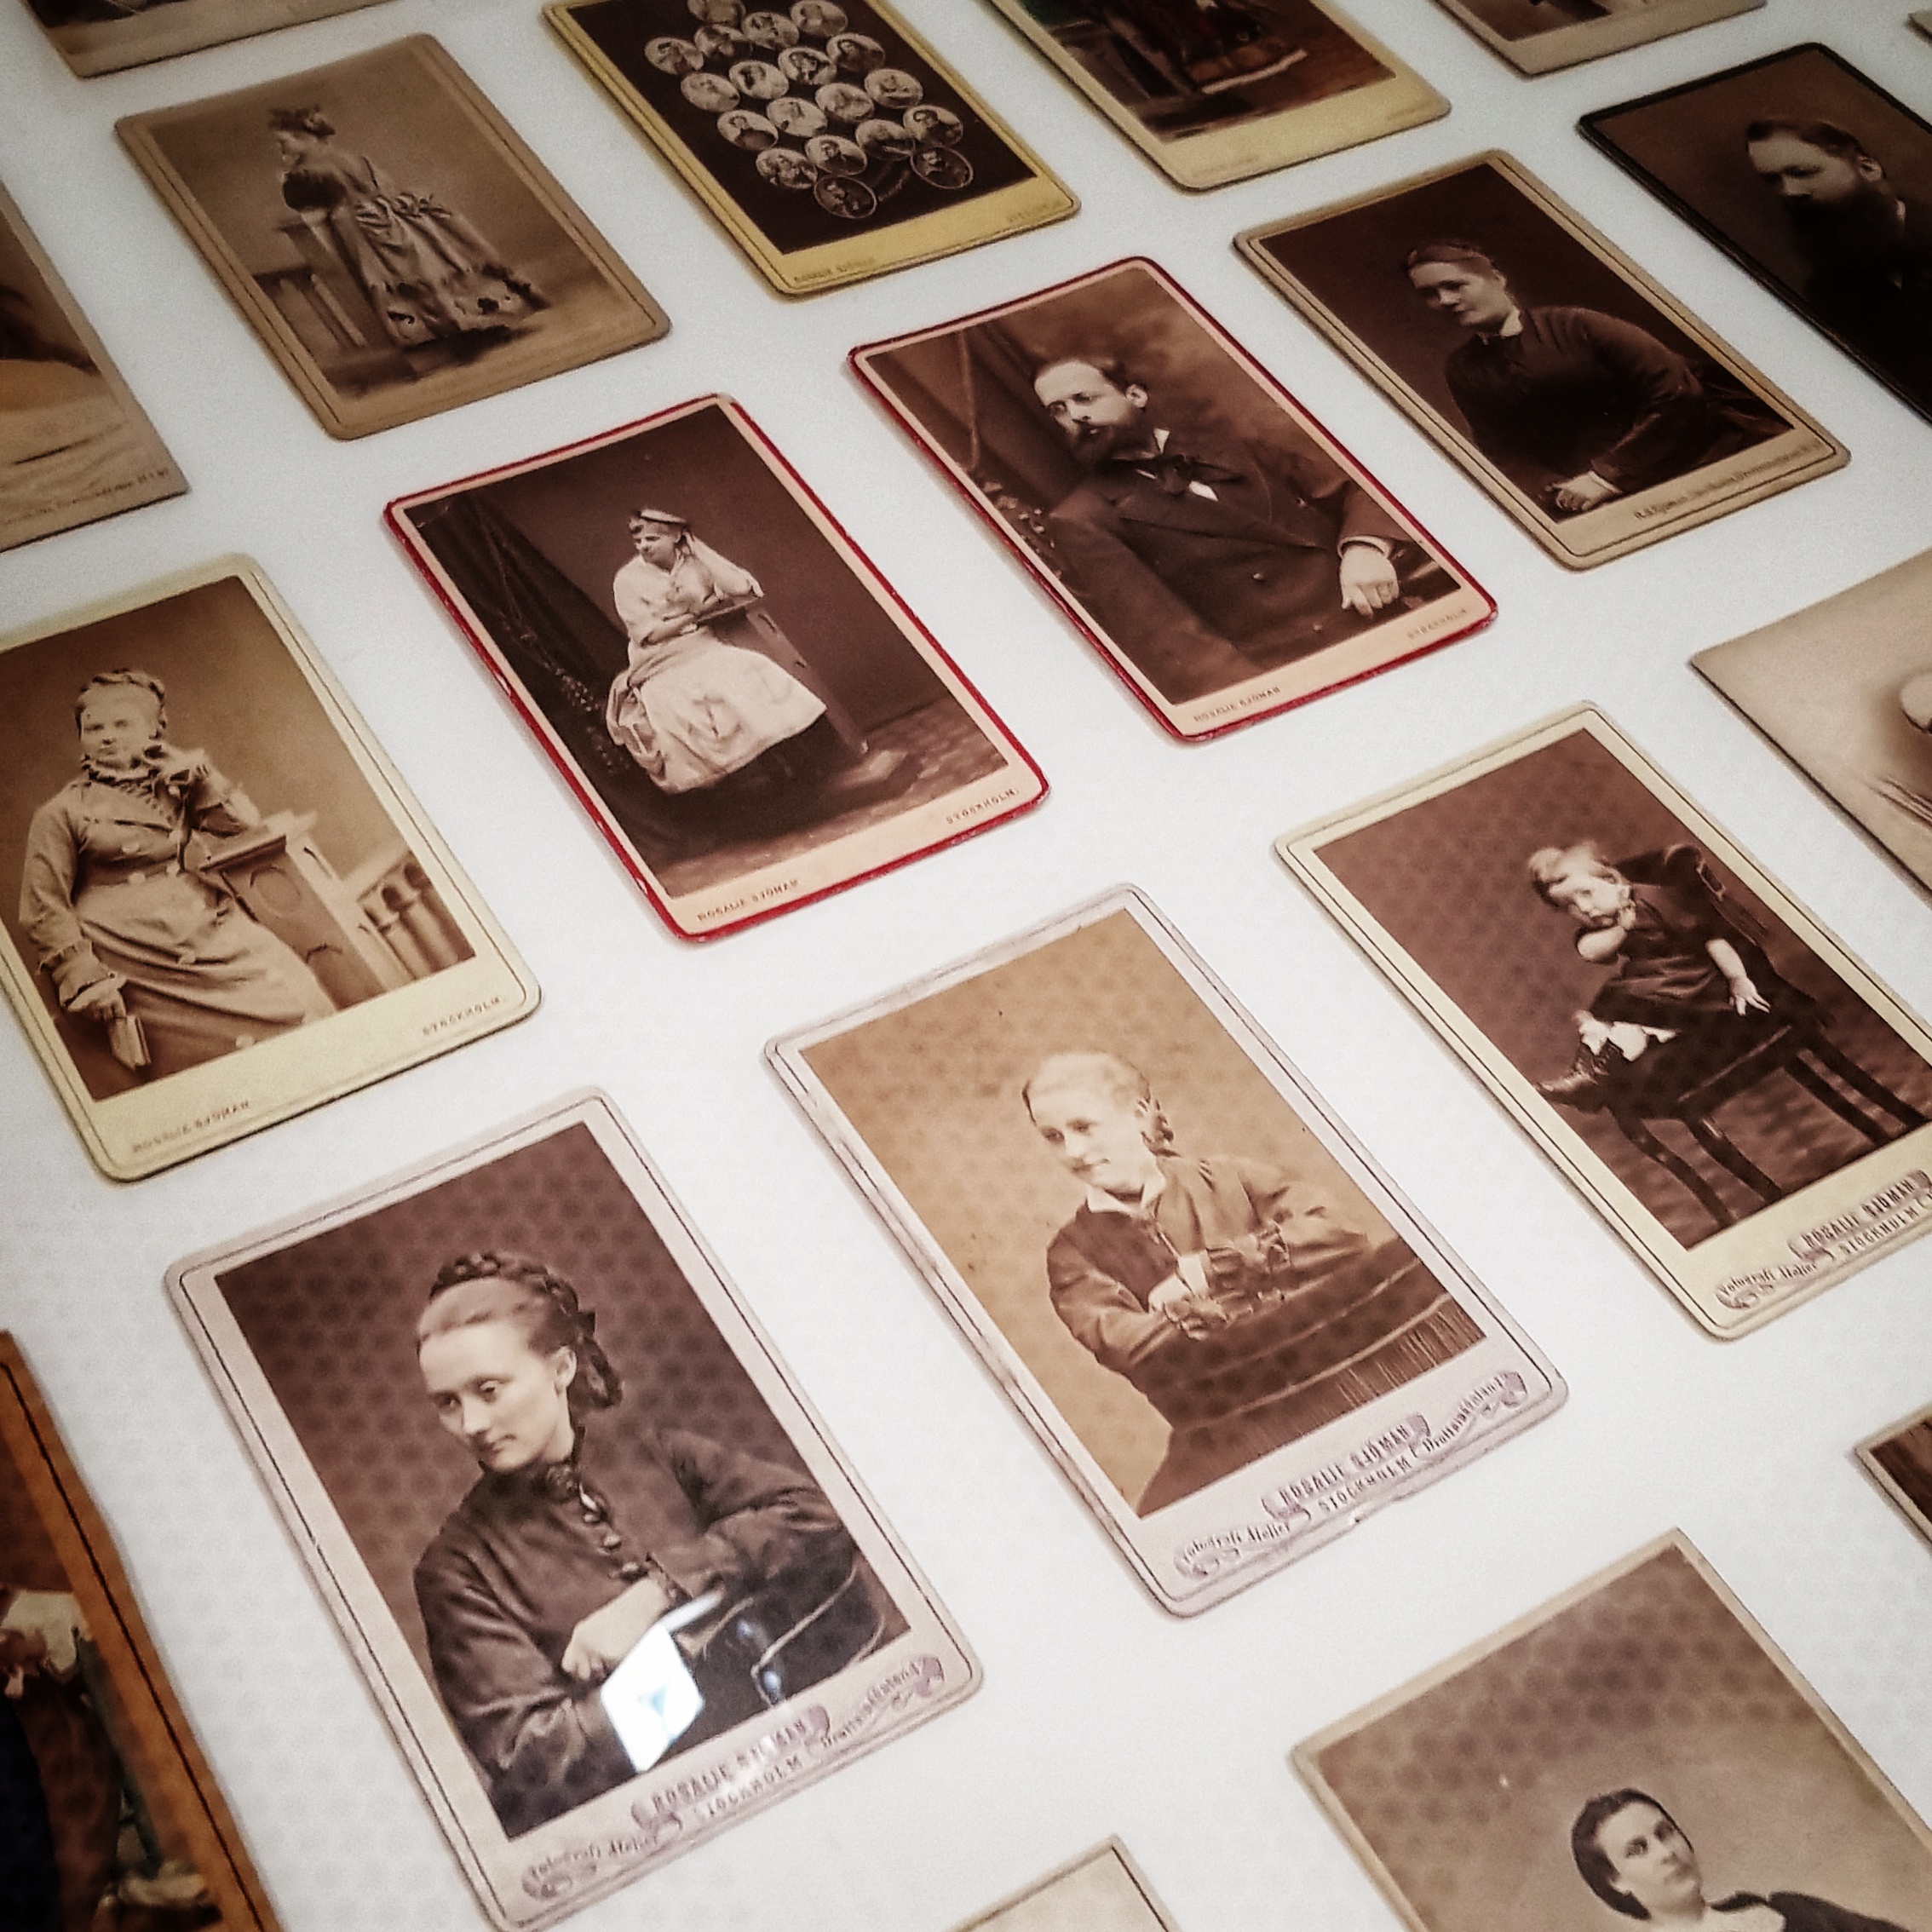 Day 170 - June 19: Exhibition with old portrait cards